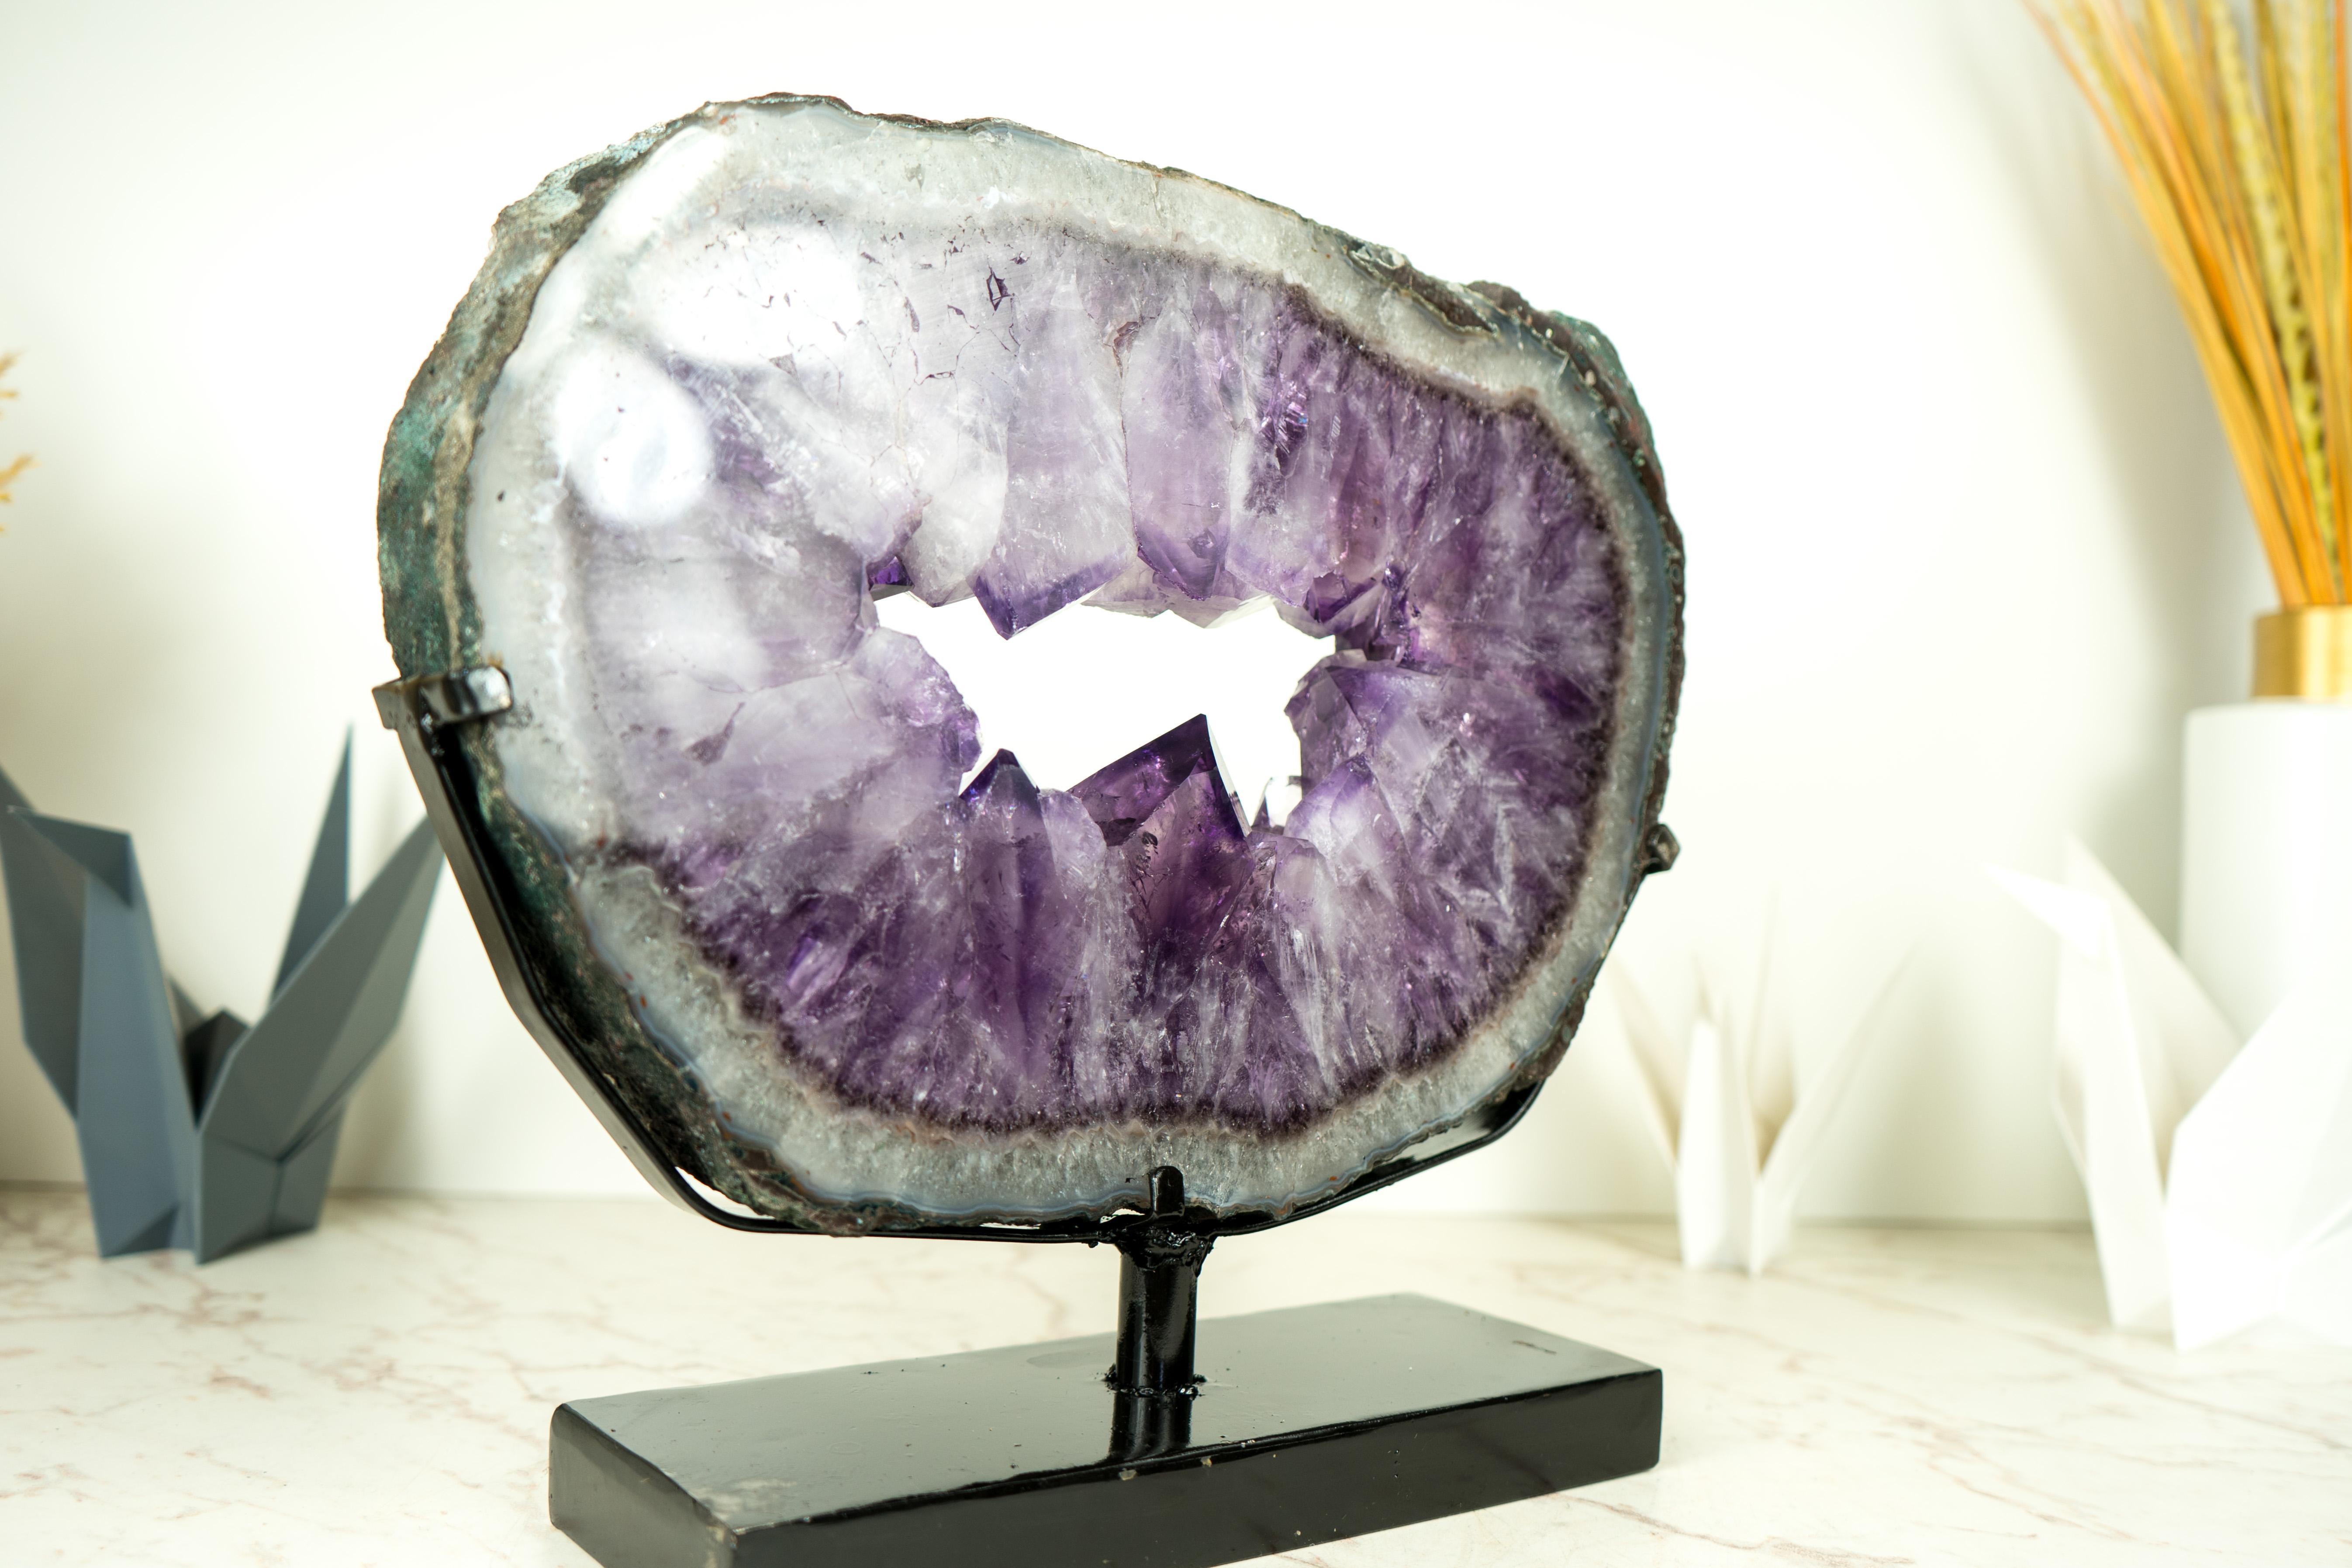 Gorgeous Amethyst Portal with Large Saturated Purple Amethyst Druzy and Blue Lace Agate

▫️ Description

An Amethyst Geode portal with many special qualities, this Amethyst brings large, perfect Amethyst points surrounded by a layer of blue lace